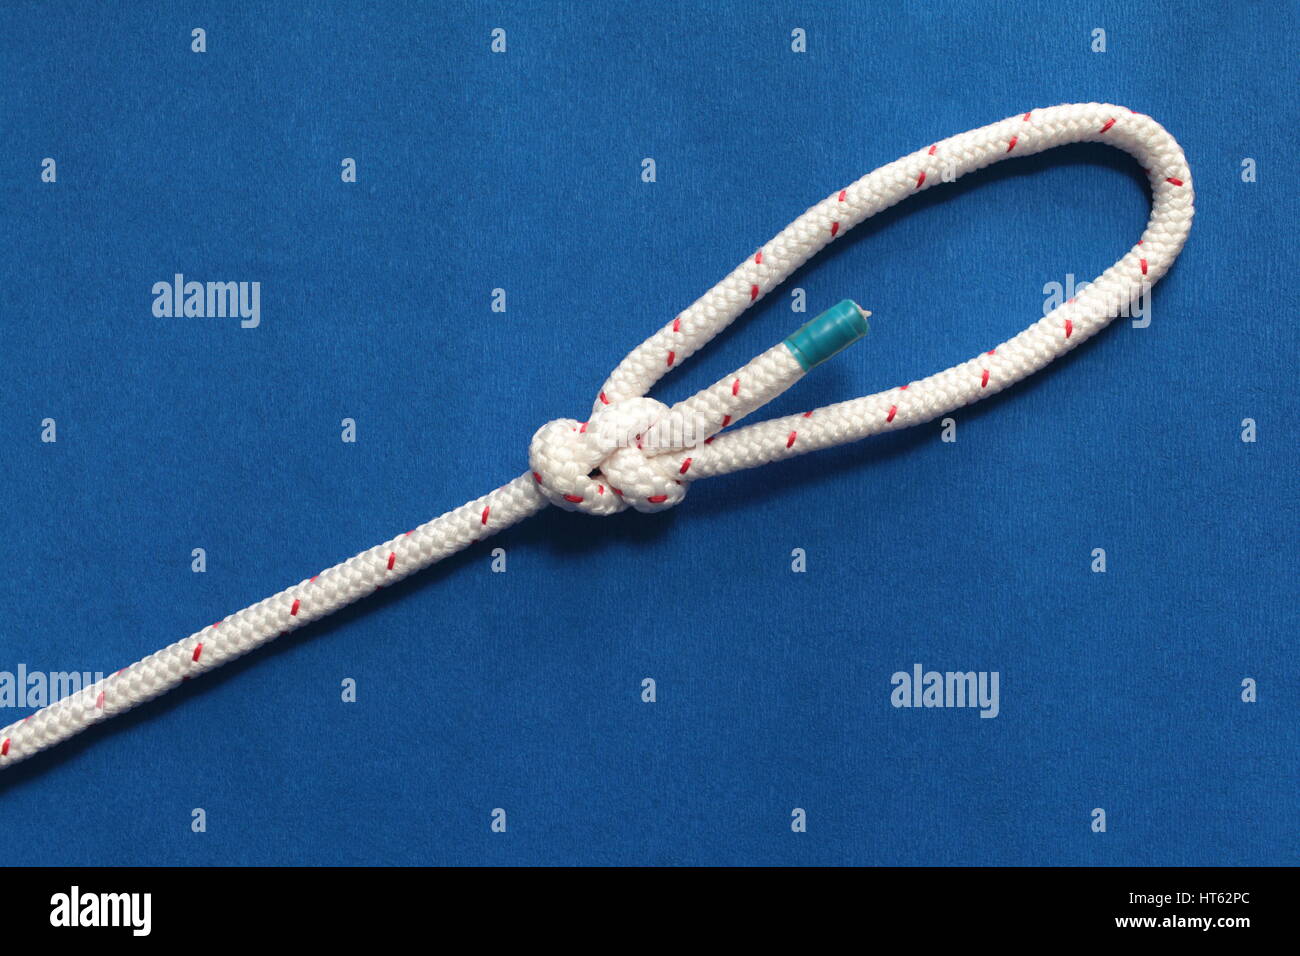 Knot loop sea knot against  blue background sea knot good Stock Photo